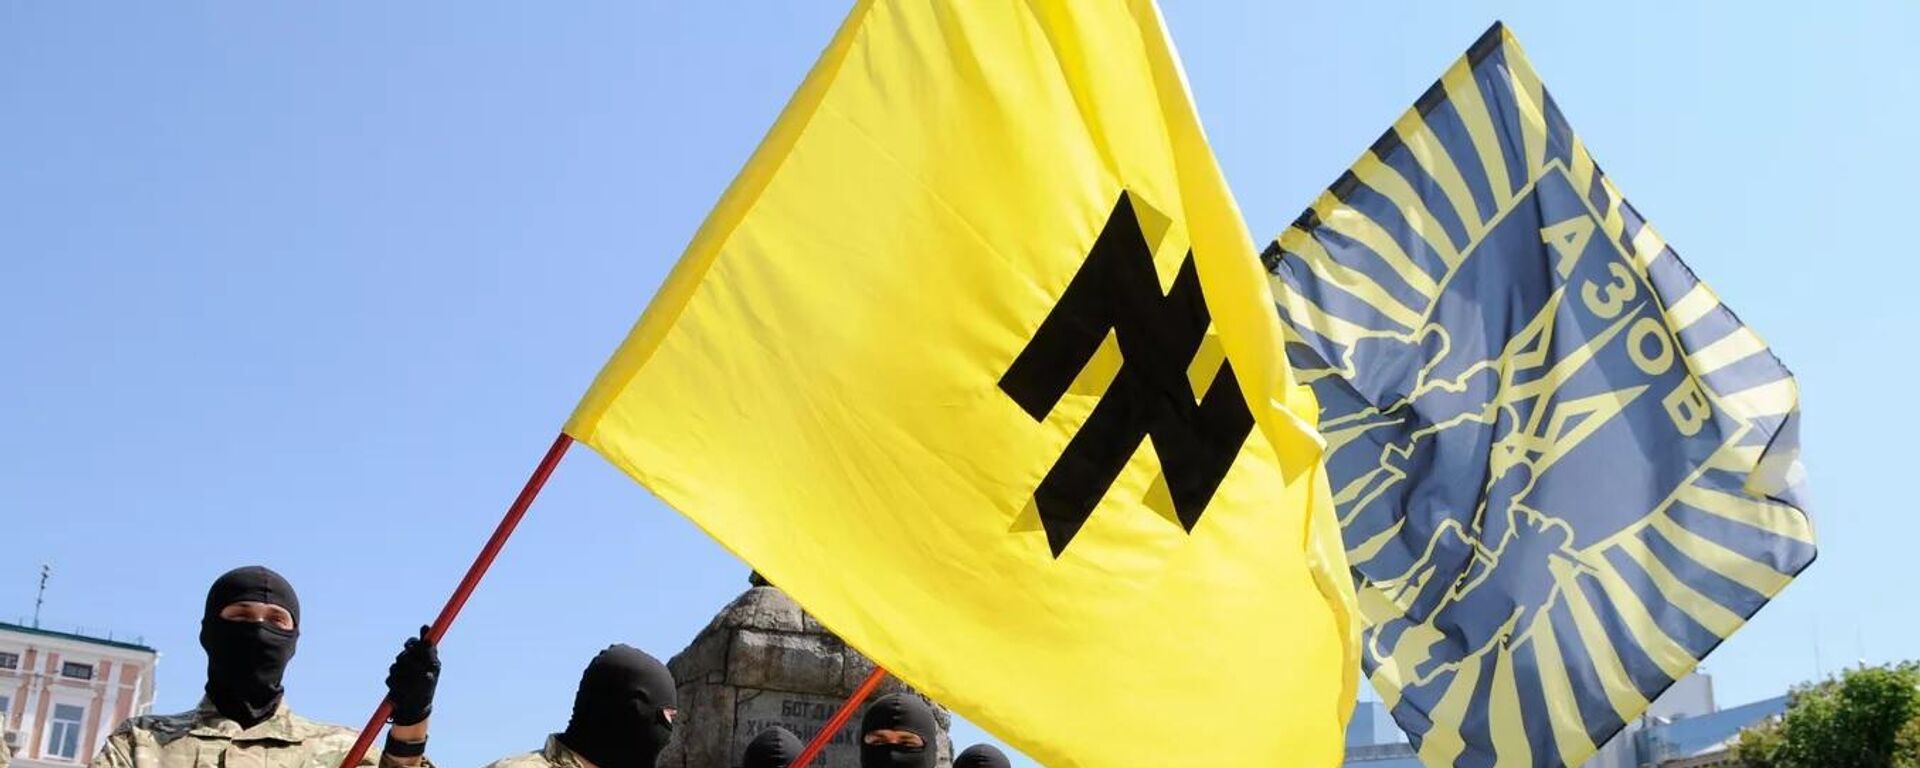 Fighters of the neo-Nazi Azov Battalion take the oath of allegiance to Ukraine in Sophia Square in Kiev before being sent to Donbass. Members of the Nazi battalion have committed hundreds of war crimes against the population of Donbass over eight years. The Azov flag has an inverted image of the runic symbol “Wolfsangel”, which was used by the Nazis. - Sputnik International, 1920, 20.05.2022